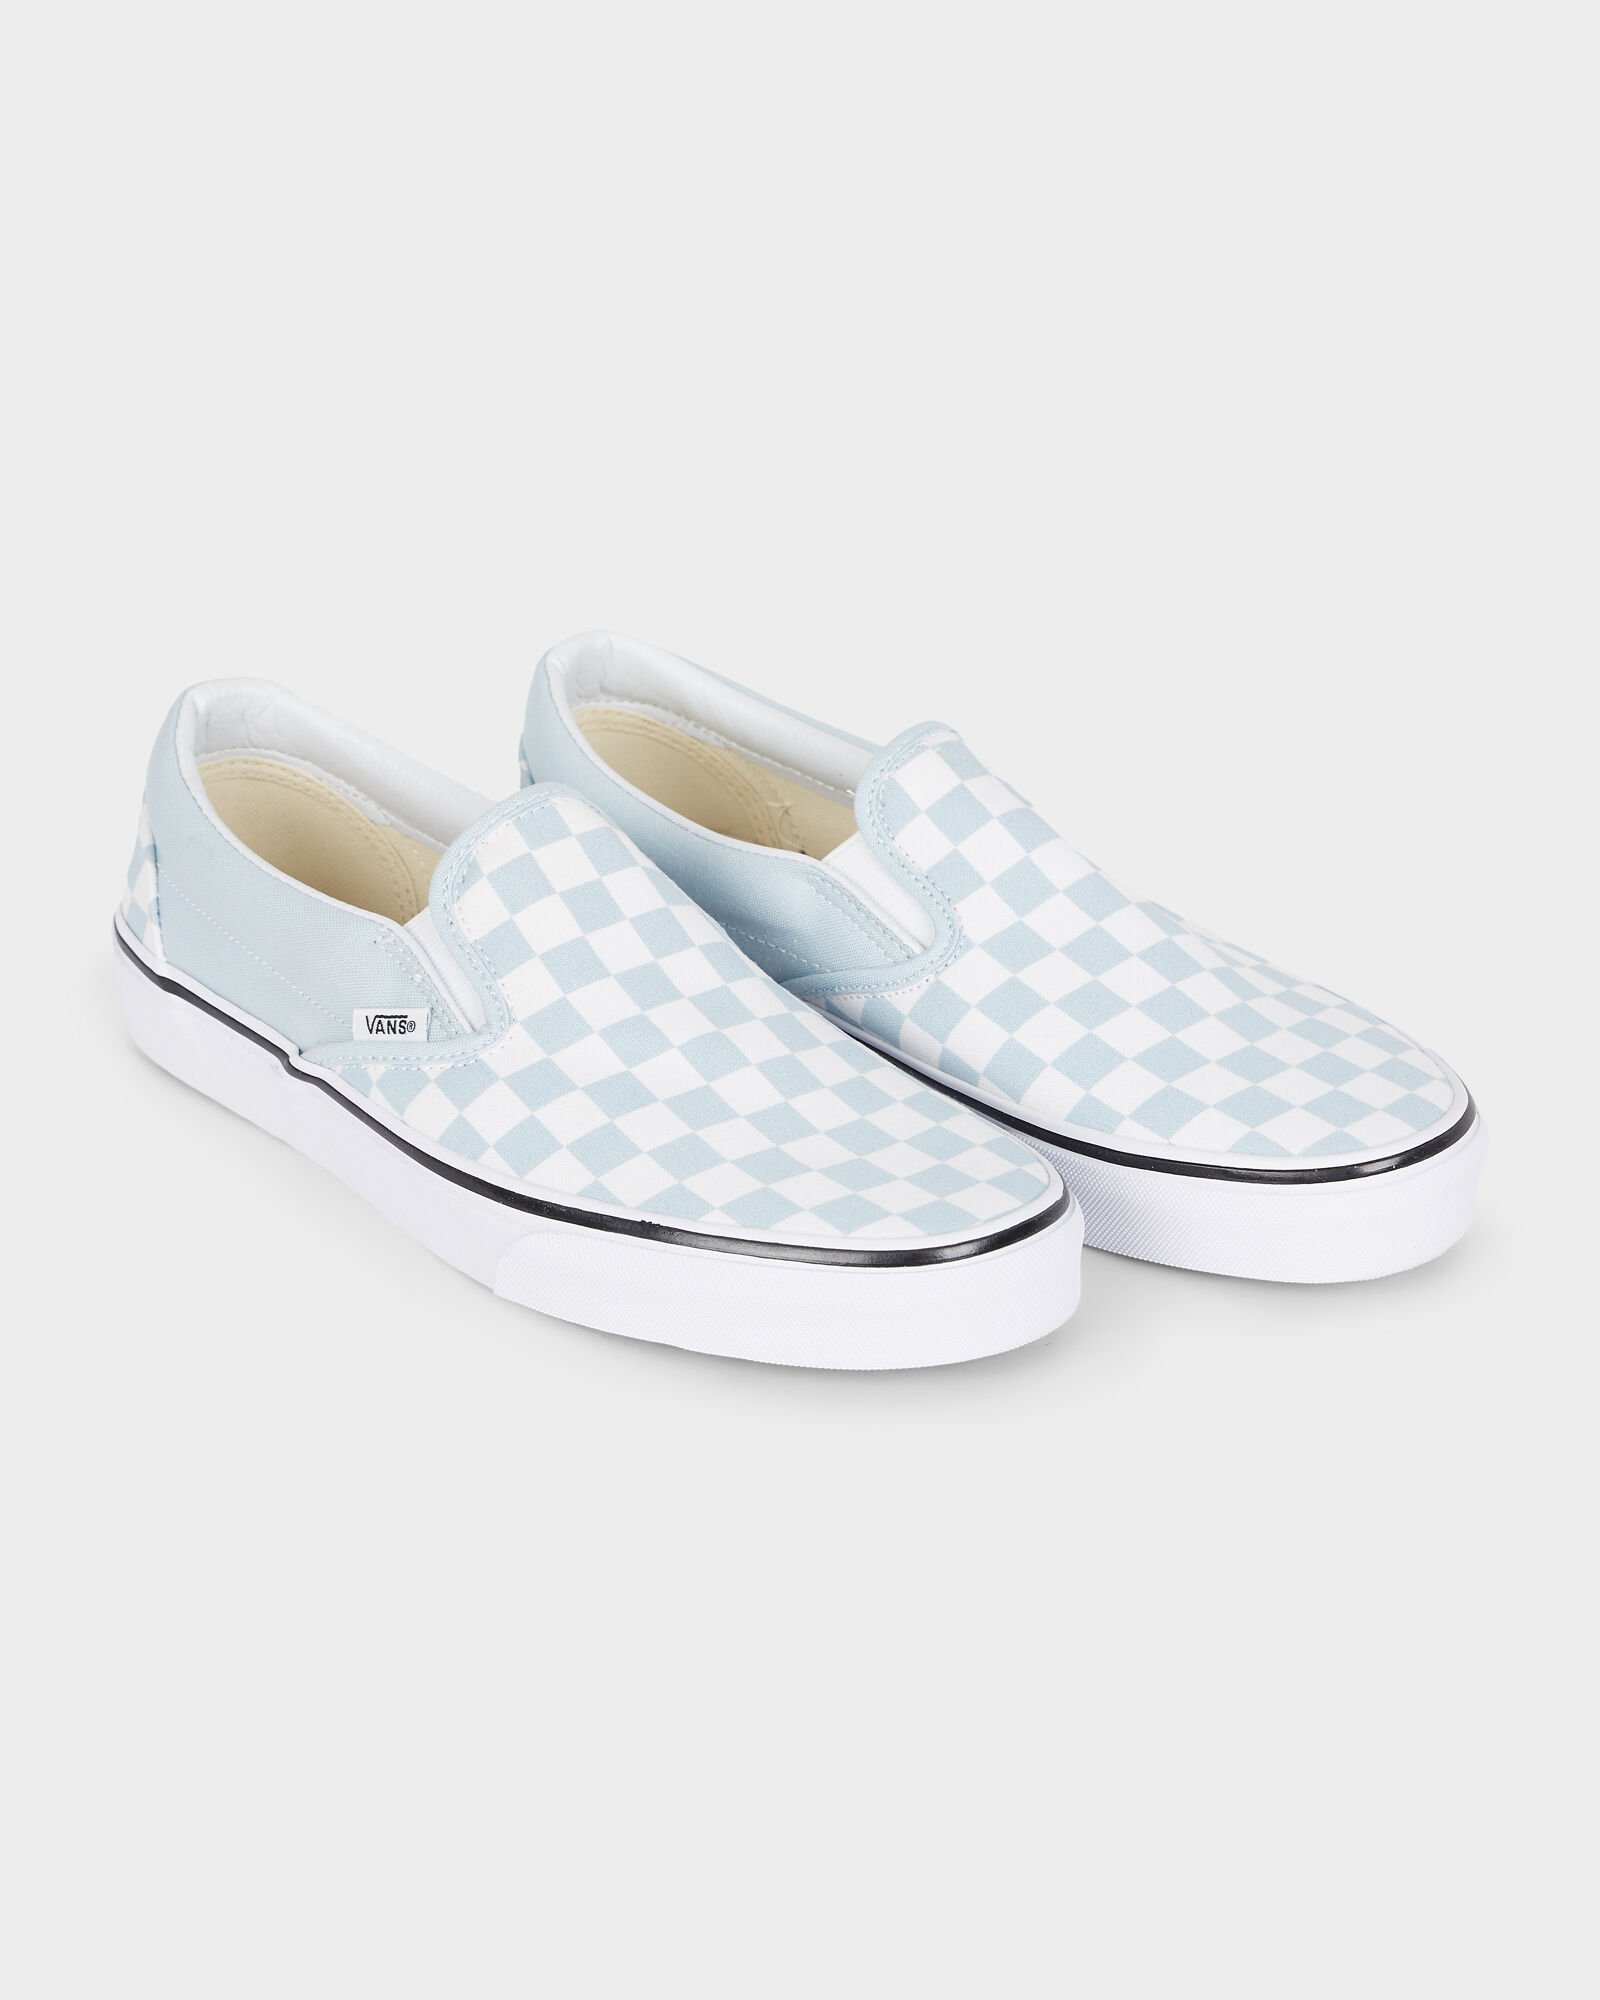 light blue vans with checkers on the side